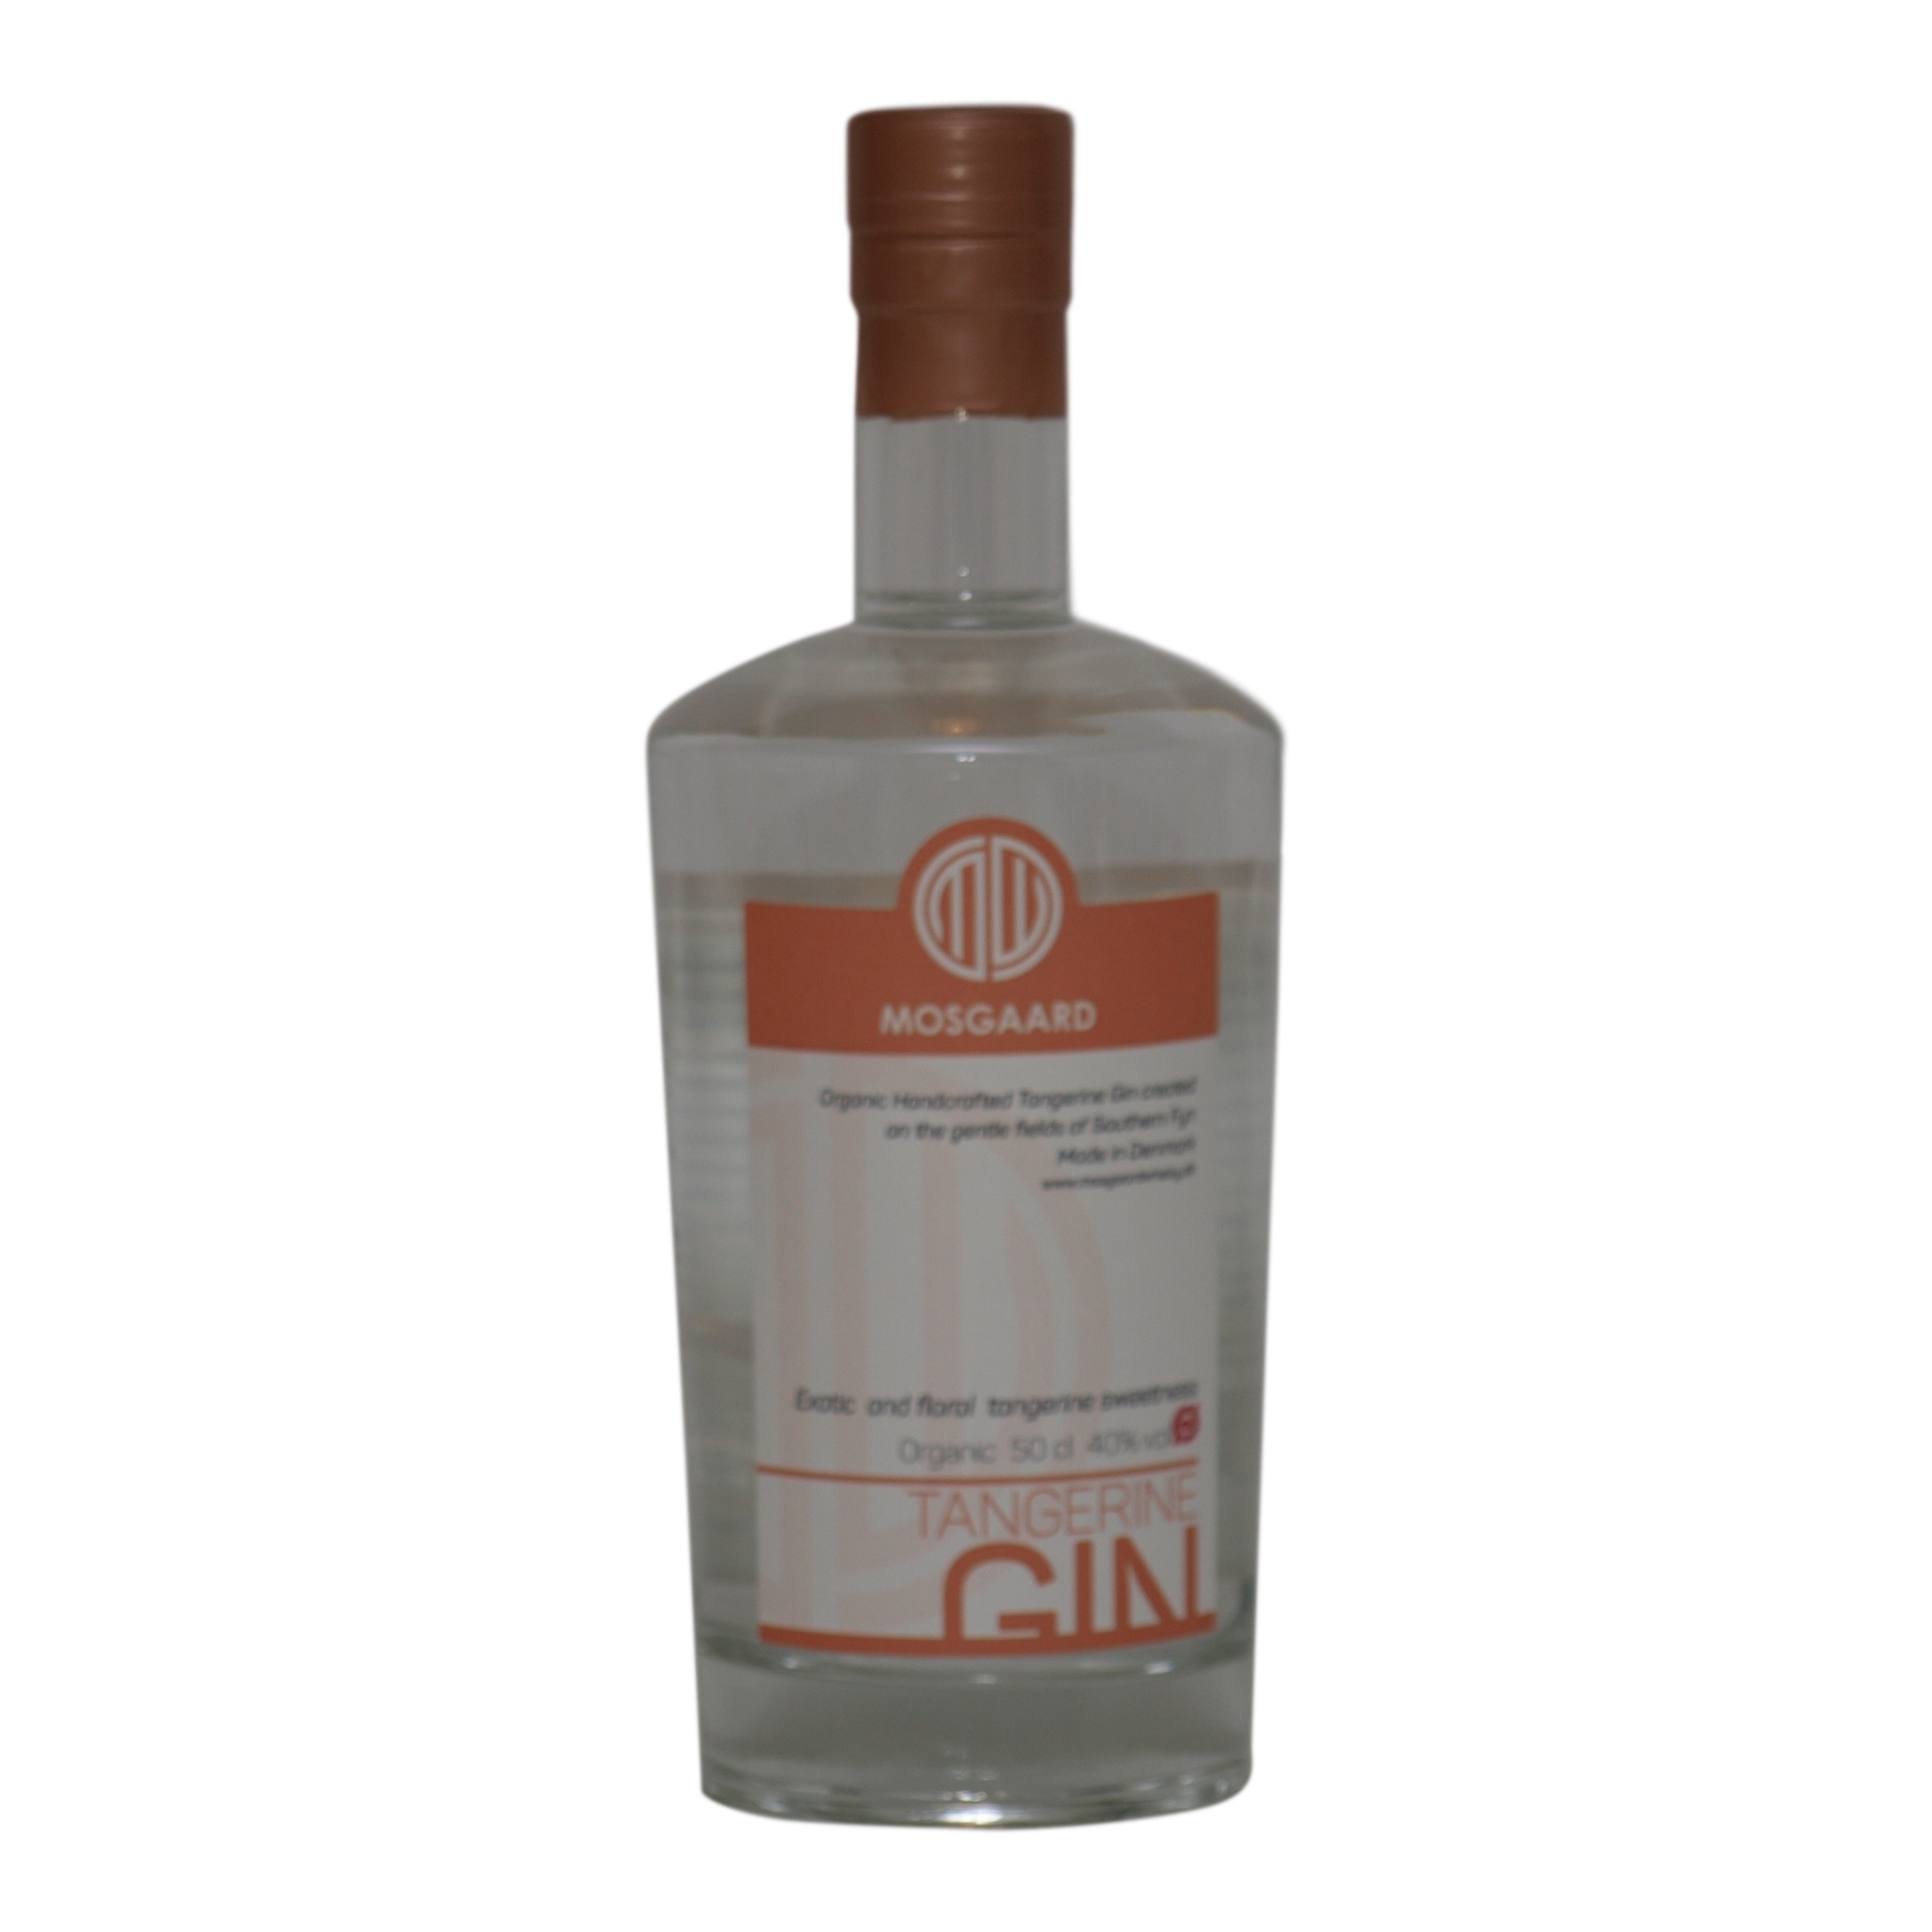 tangerine gin review